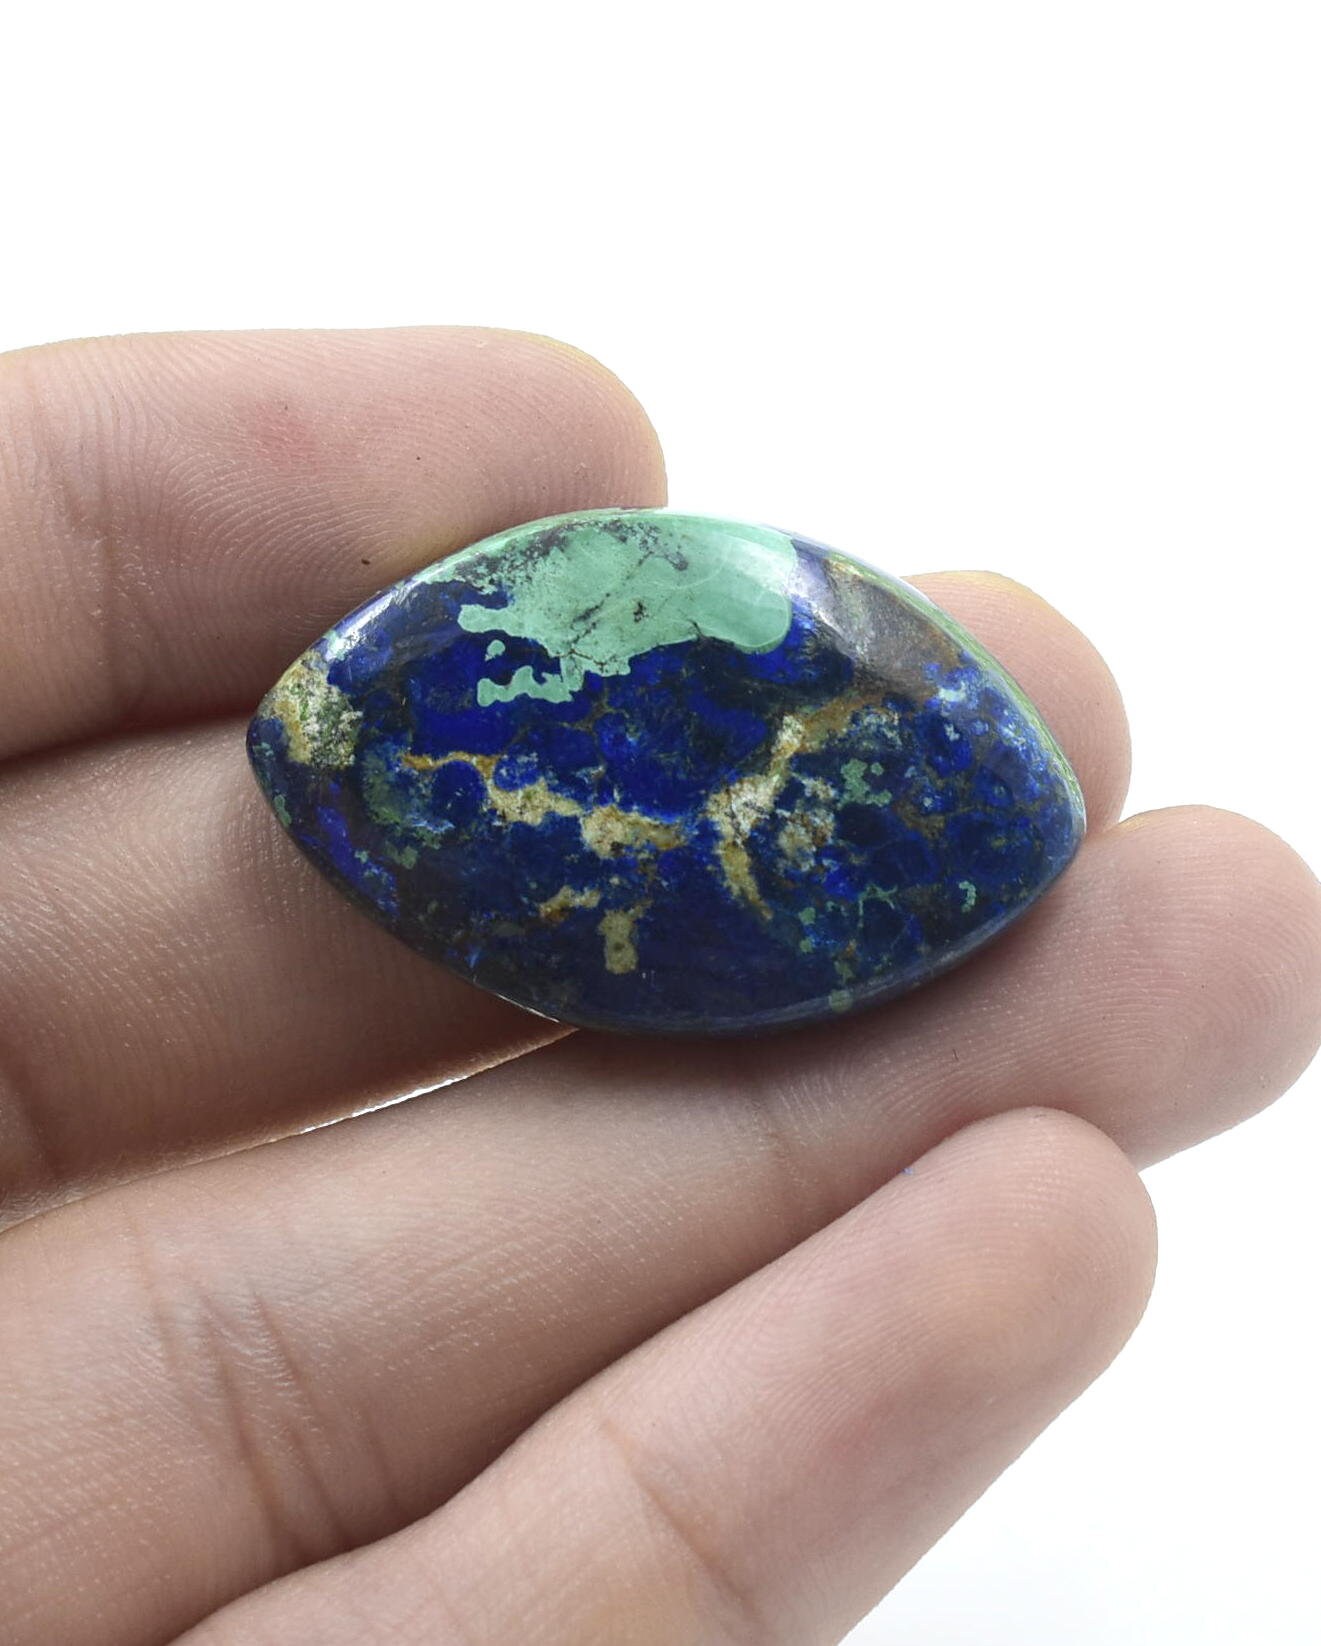 100% Natural Azurite Malachite Cabochon Good quality stone Beautiful Art Making for jewellery Ring 43.60 CARAT 33X21 MM | Save 33% - Rajasthan Living 12